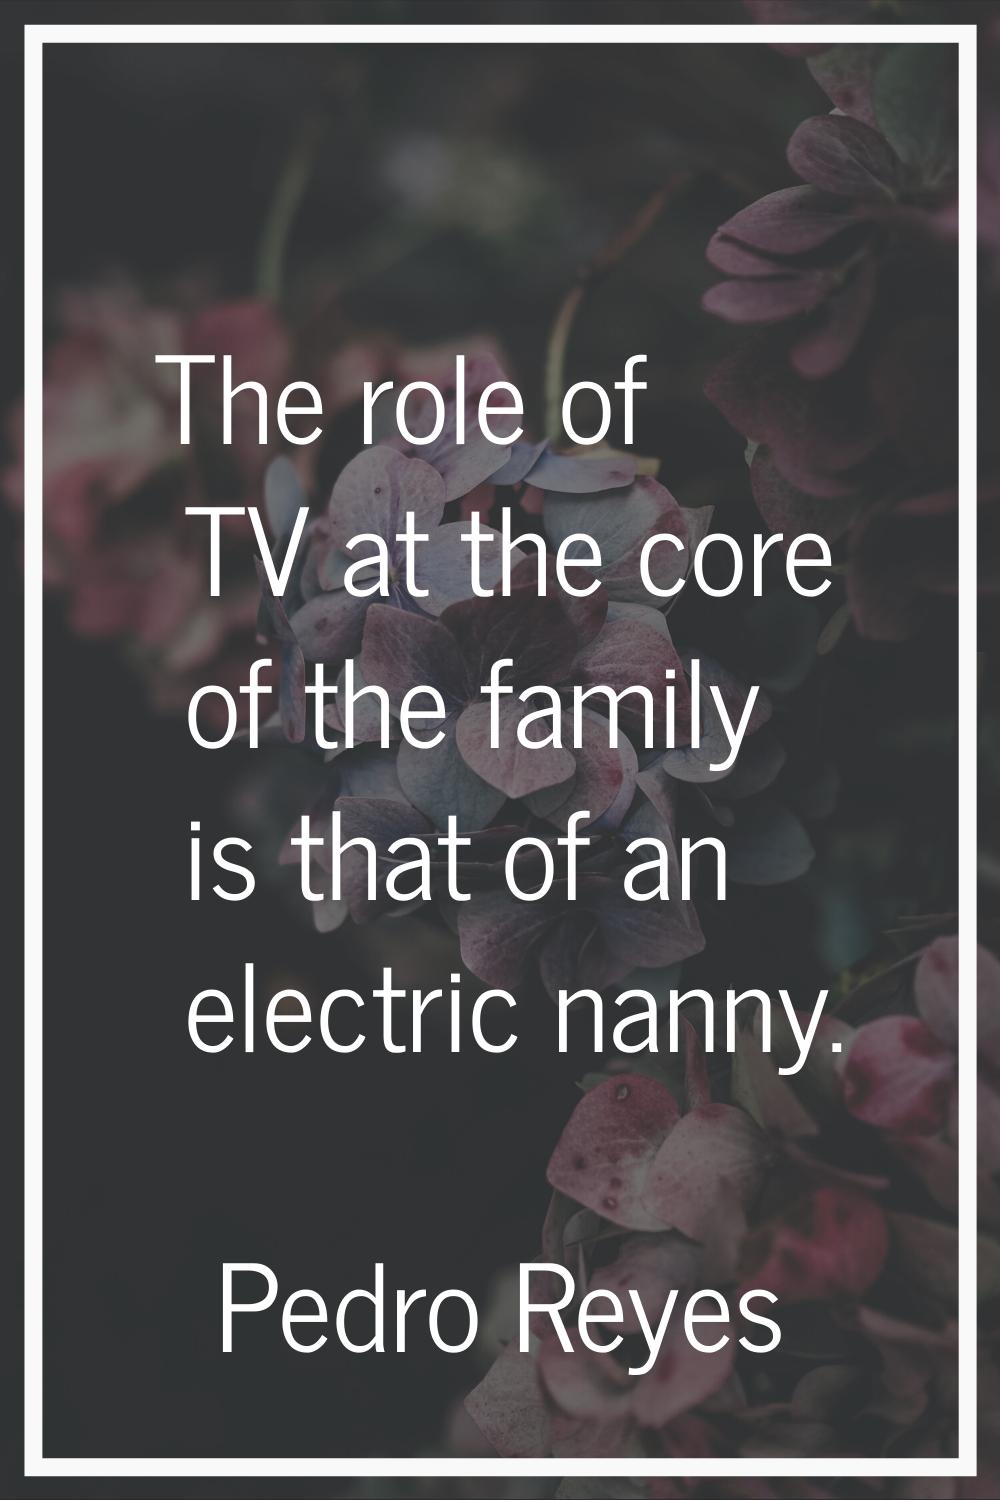 The role of TV at the core of the family is that of an electric nanny.